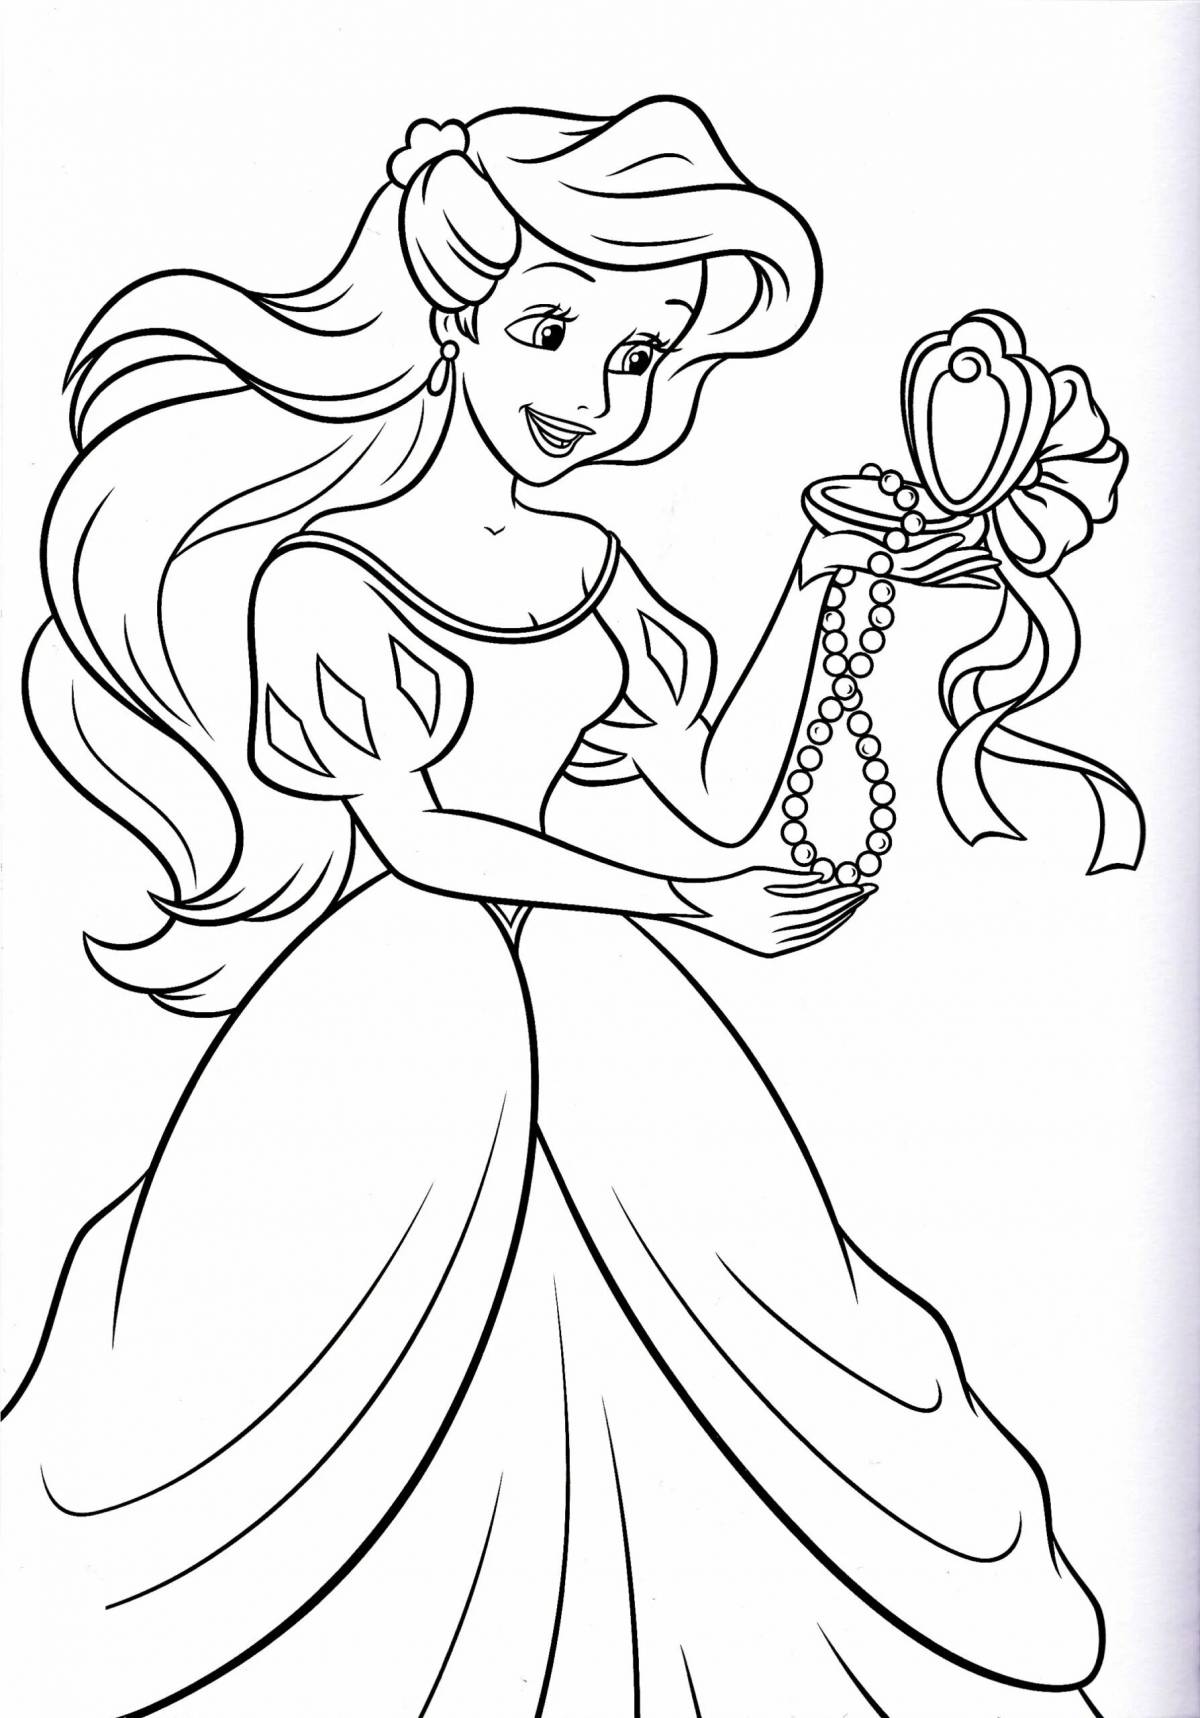 Fancy princess coloring pages for kids